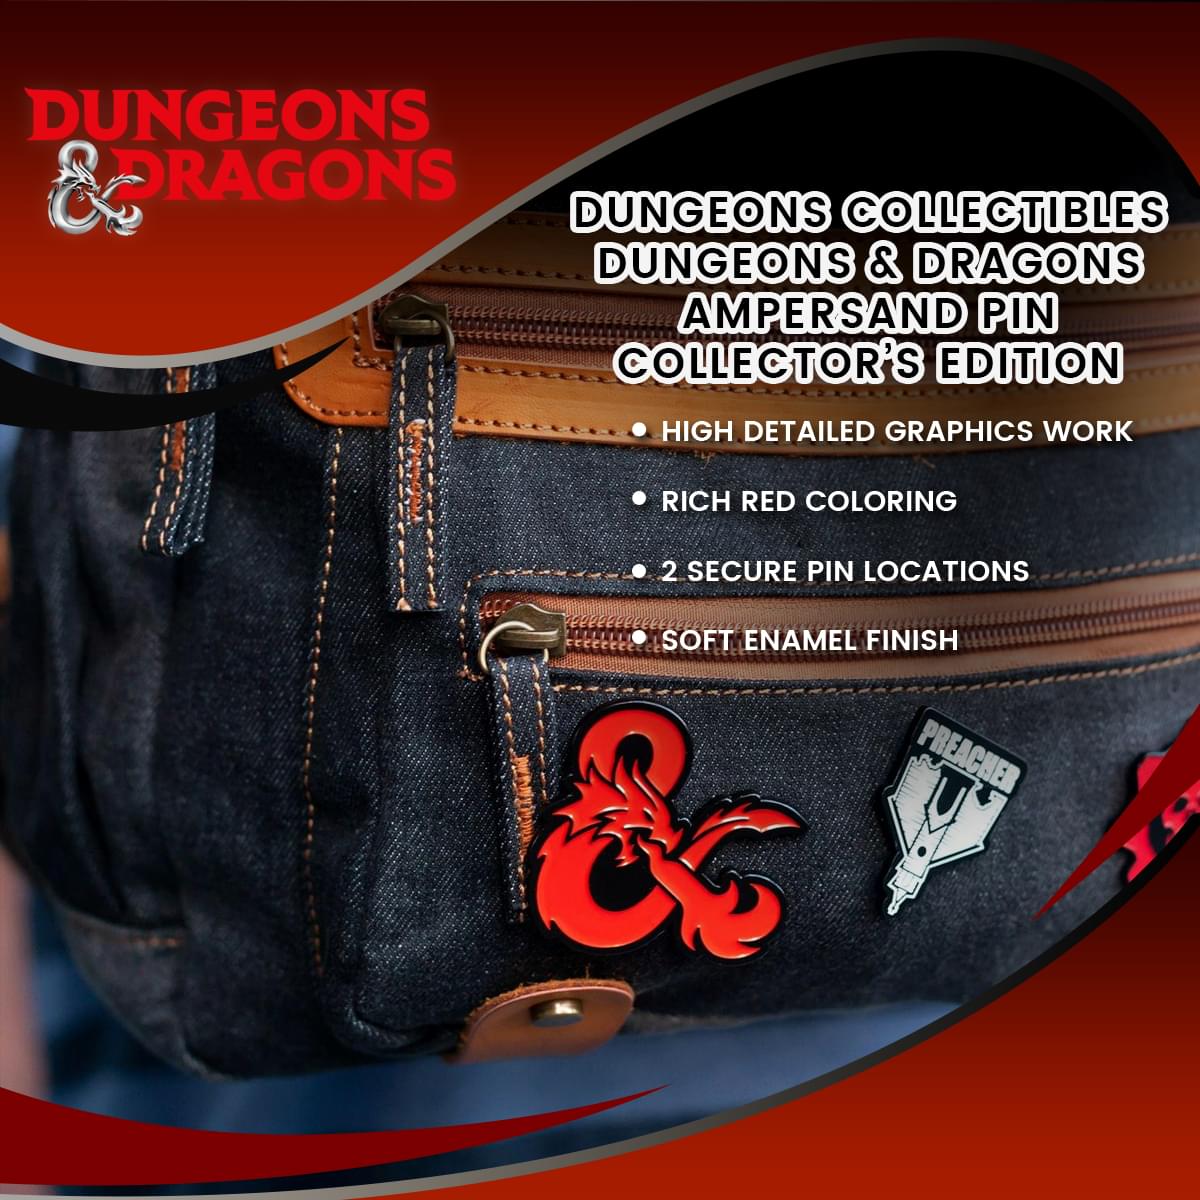 Dungeons Collectibles | Dungeons & Dragons Ampersand Pin| Collector’s Edition